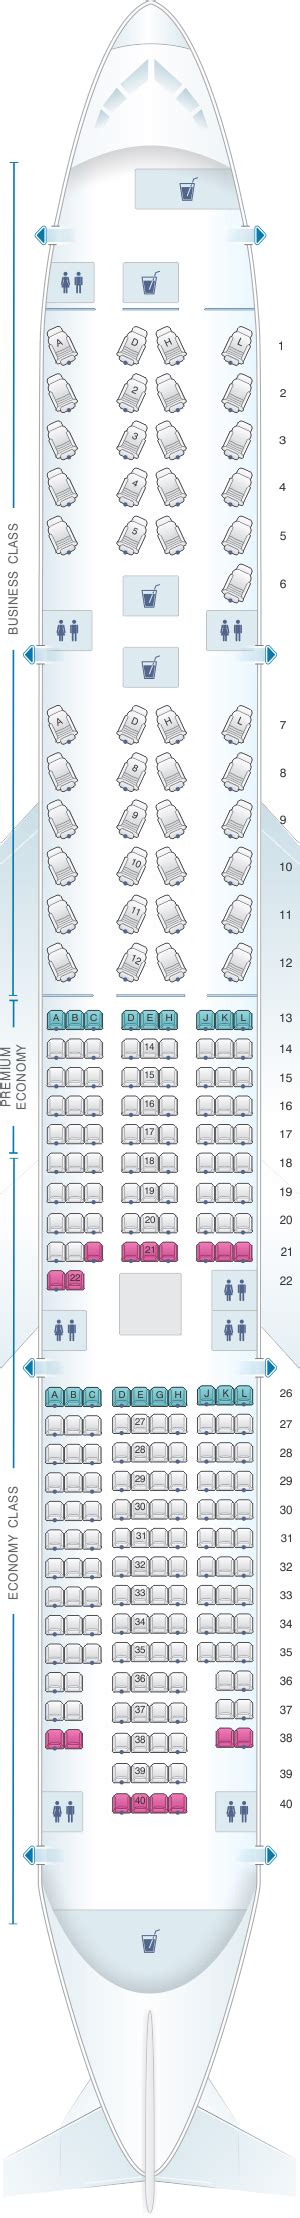 American Airlines Boeing Jet Seat Map